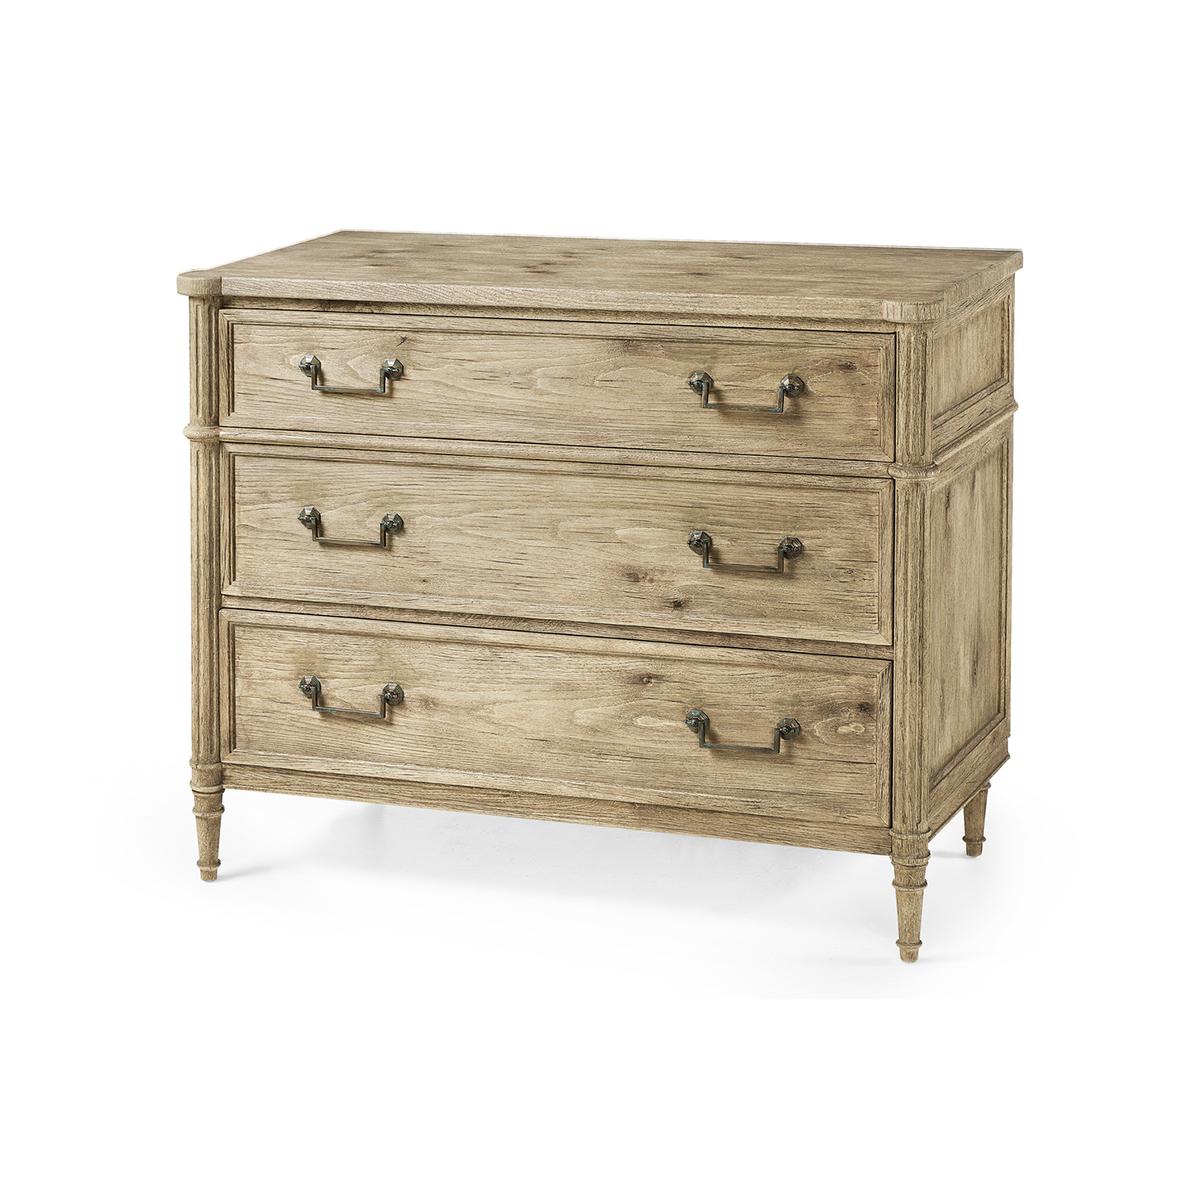 French Louis XVI Style Commode, made with chestnut in a natural bleached finish that marries effortlessly with custom-cast hardware. Turret corners, fluted styles, three long drawers and turned and tapered legs. A versatile piece that elevates both